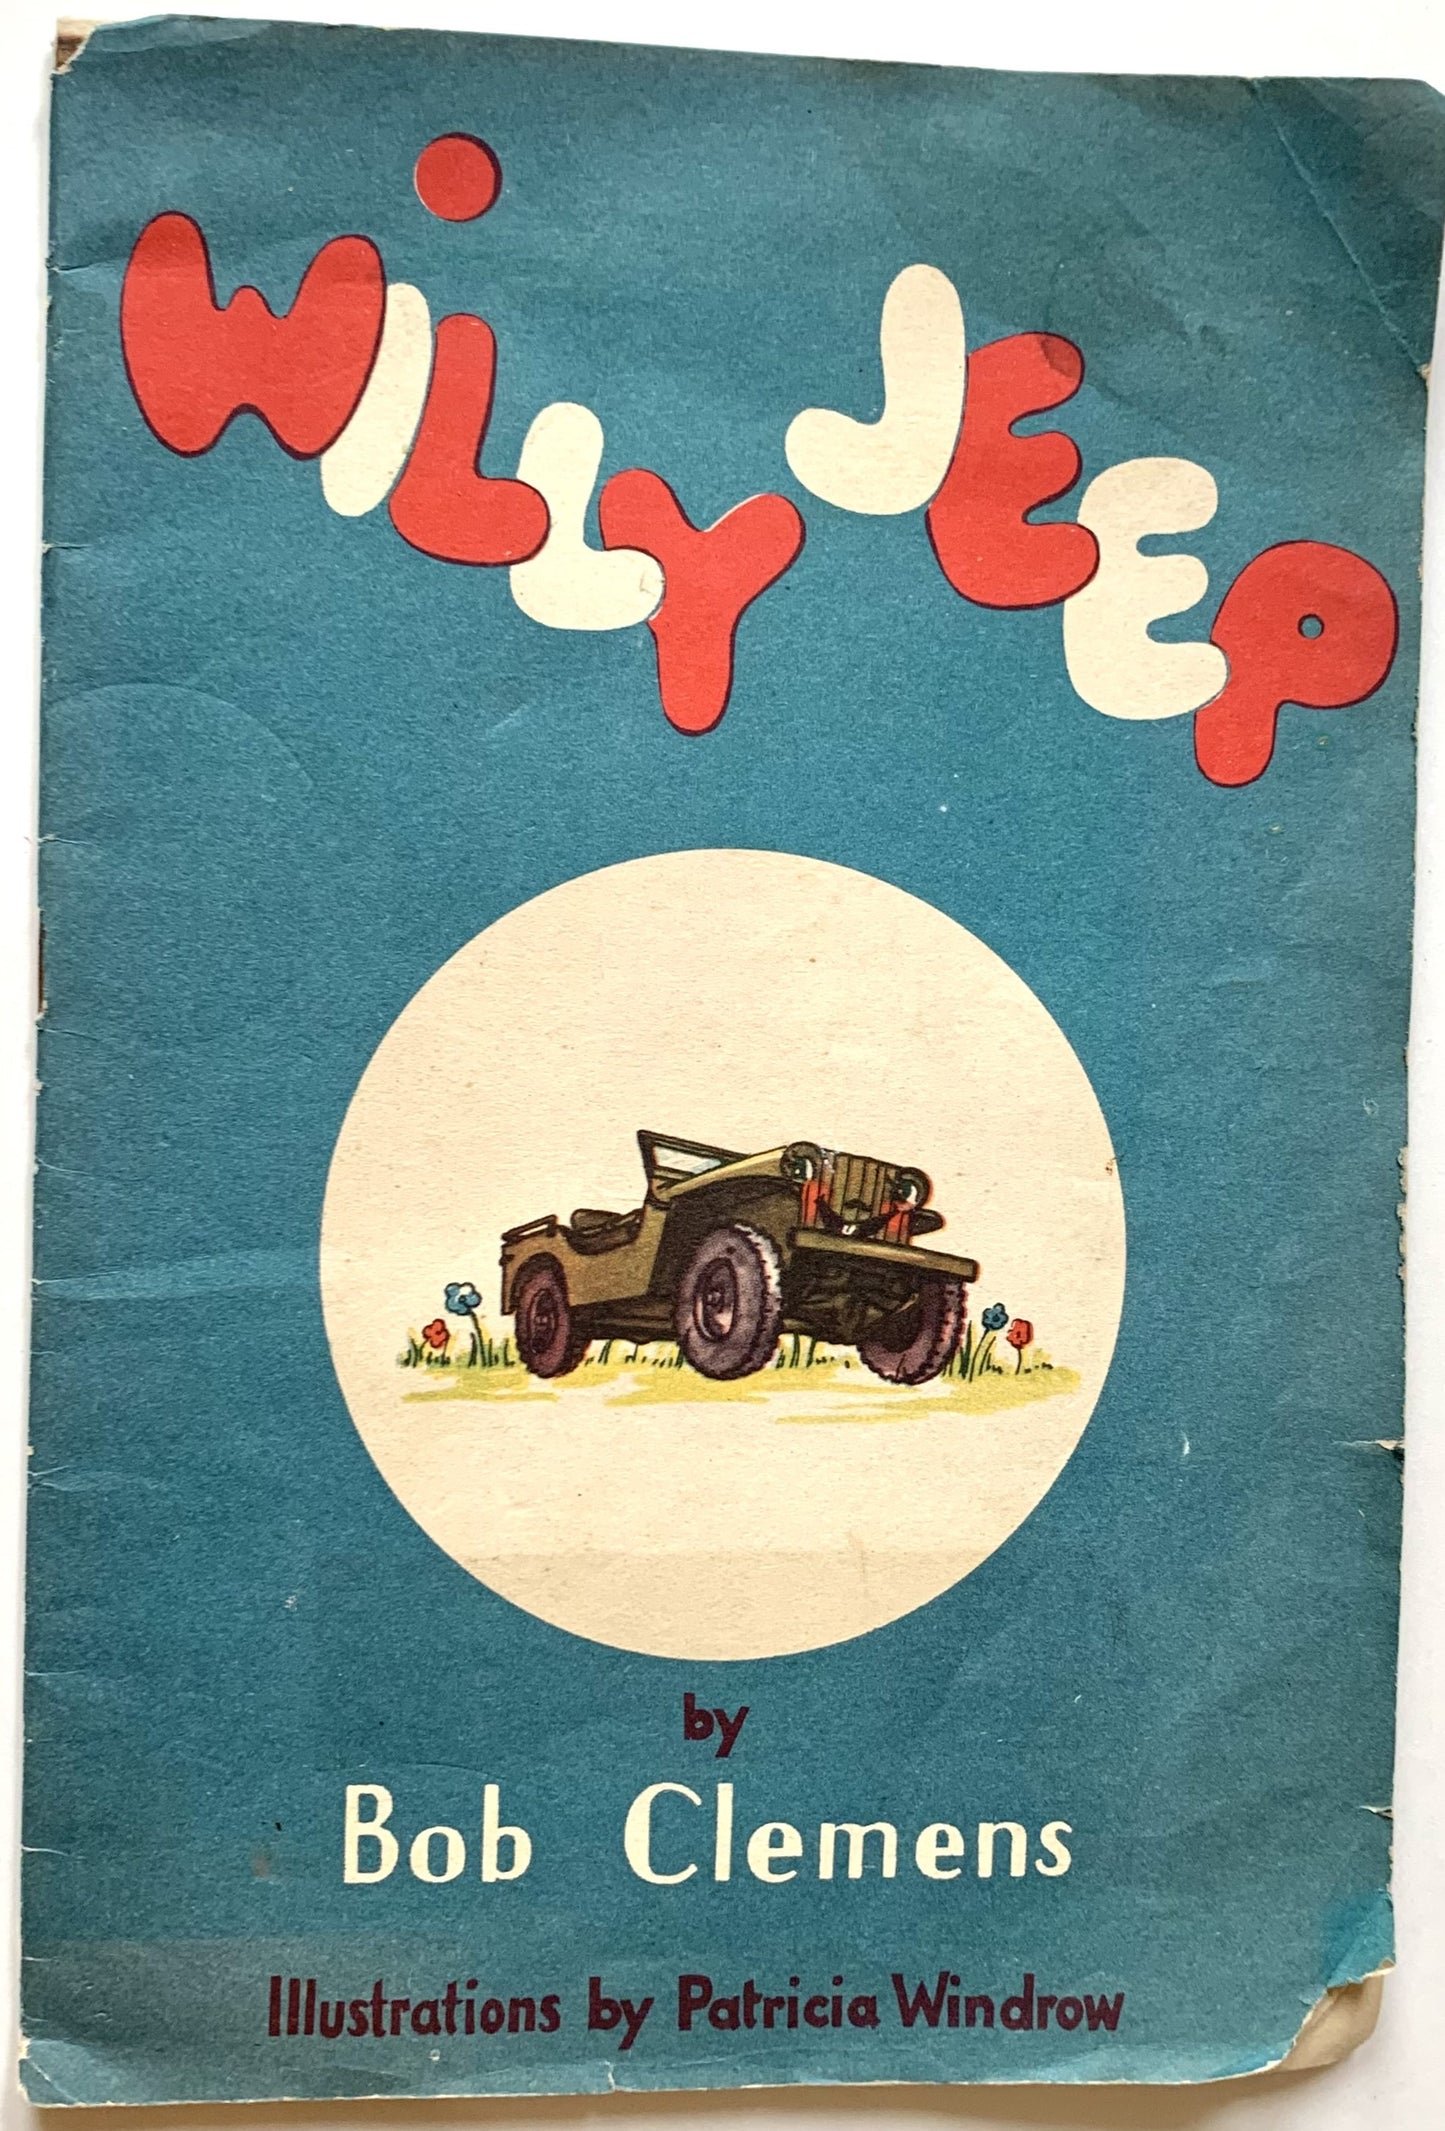 Willy Jeep